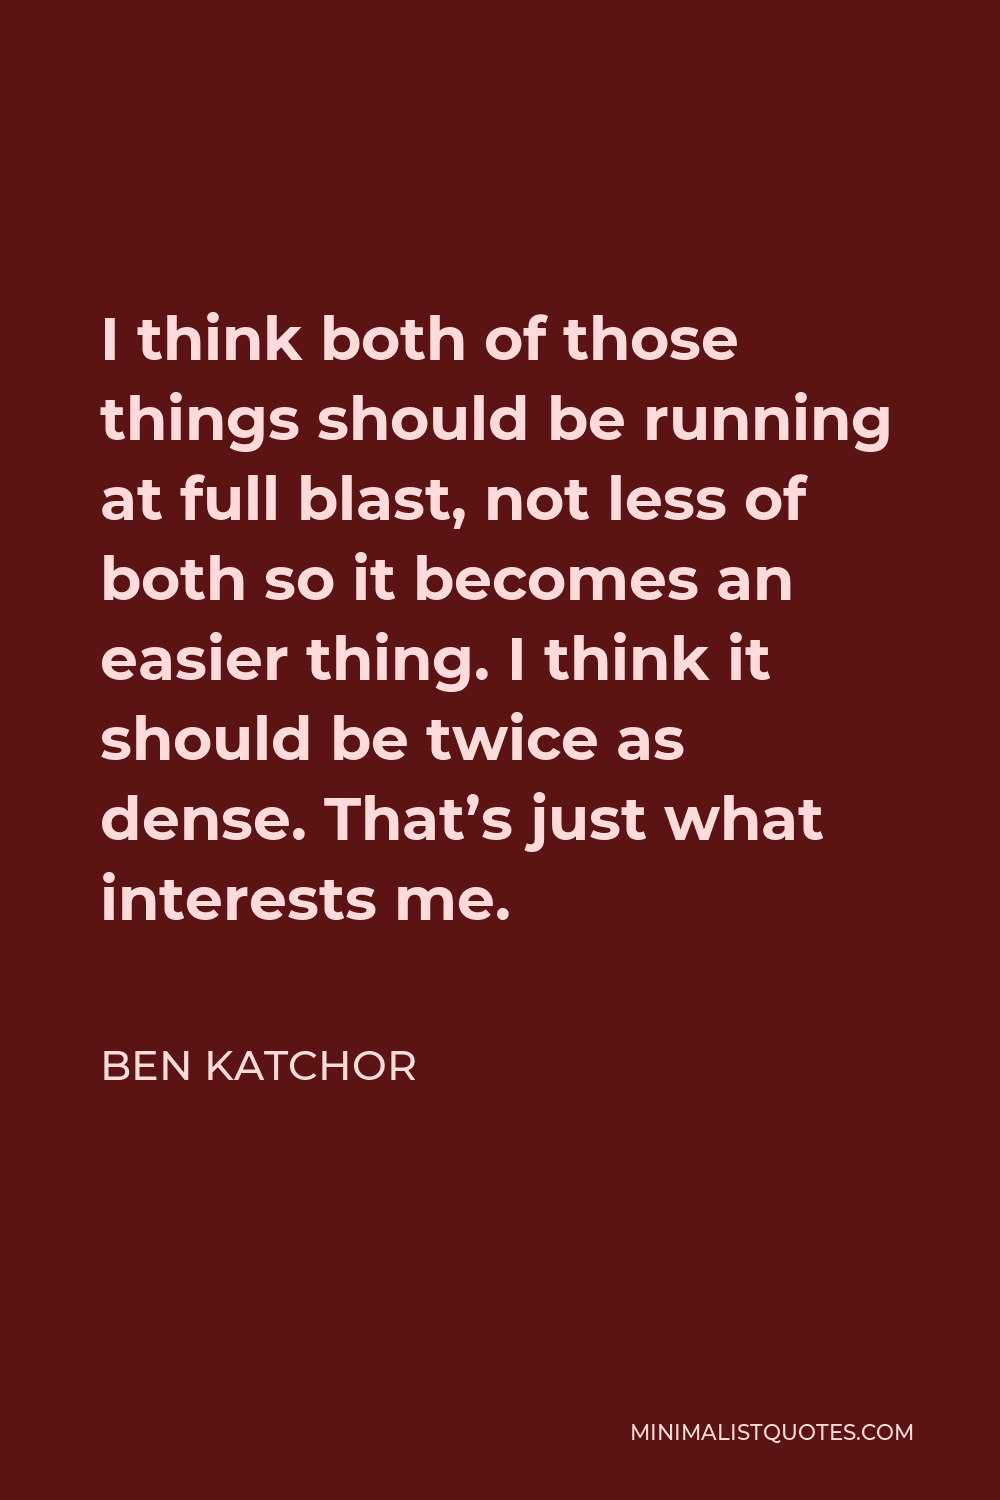 Ben Katchor Quote - I think both of those things should be running at full blast, not less of both so it becomes an easier thing. I think it should be twice as dense. That’s just what interests me.